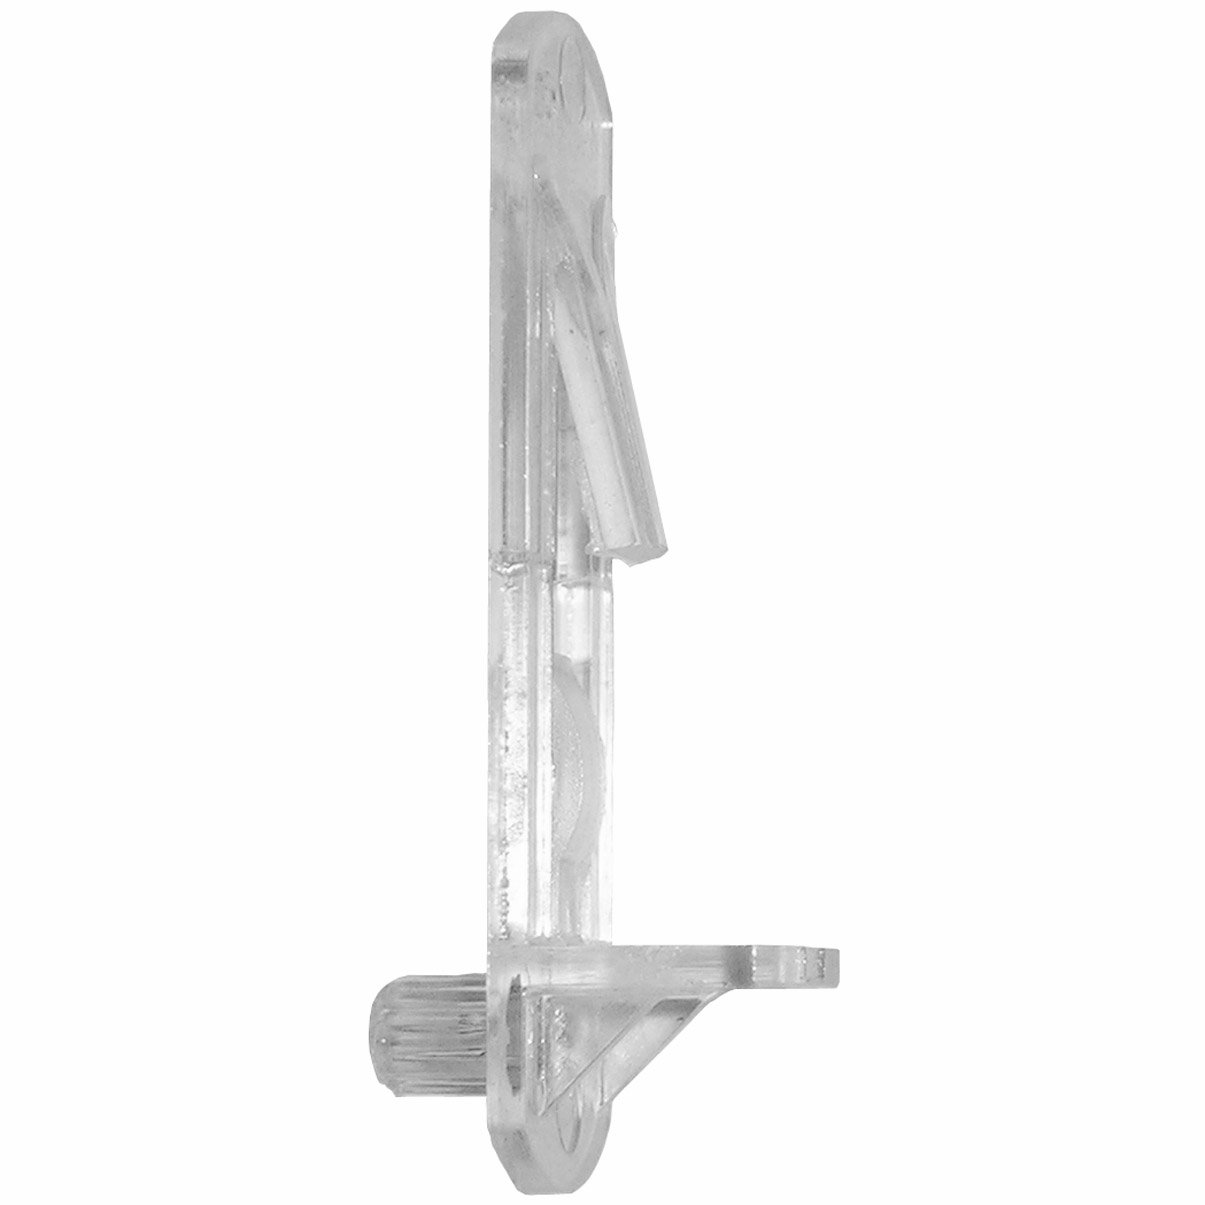 1/4" Post Clear Plastic Shelf Support for 3/4" Thick Shelf